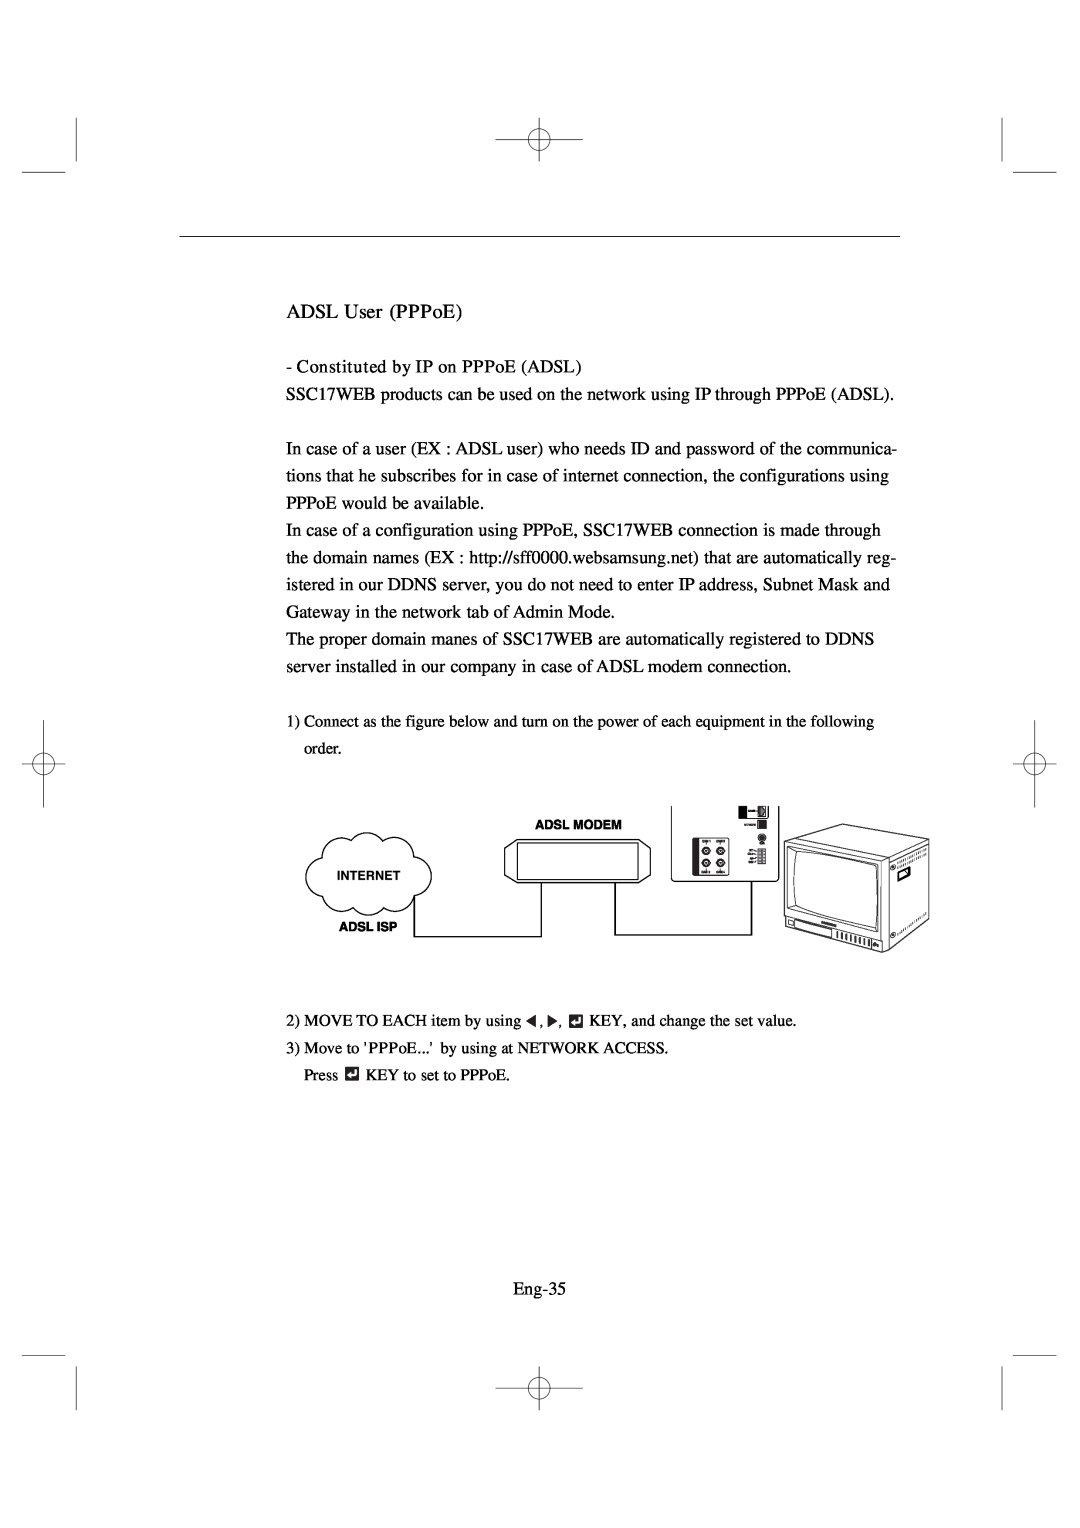 Samsung SSC17WEB manual ADSL User PPPoE, Constituted- by IP on PPPoE ADSL 